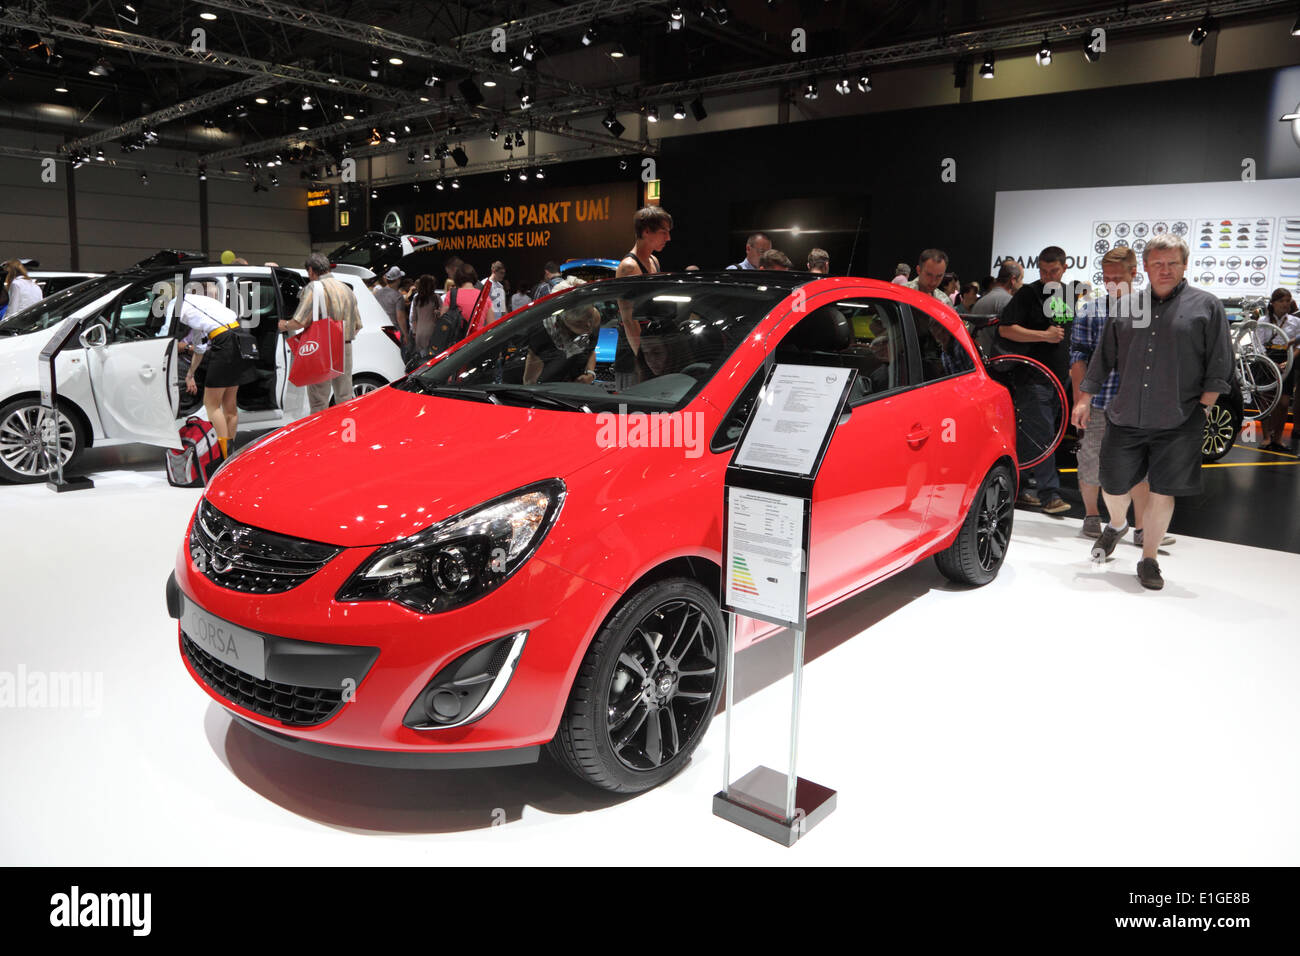 Opel Corsa Coupe at the AMI - Auto Mobile International Trade Fair on June 1st, 2014 in Leipzig, Saxony, Germany Stock Photo